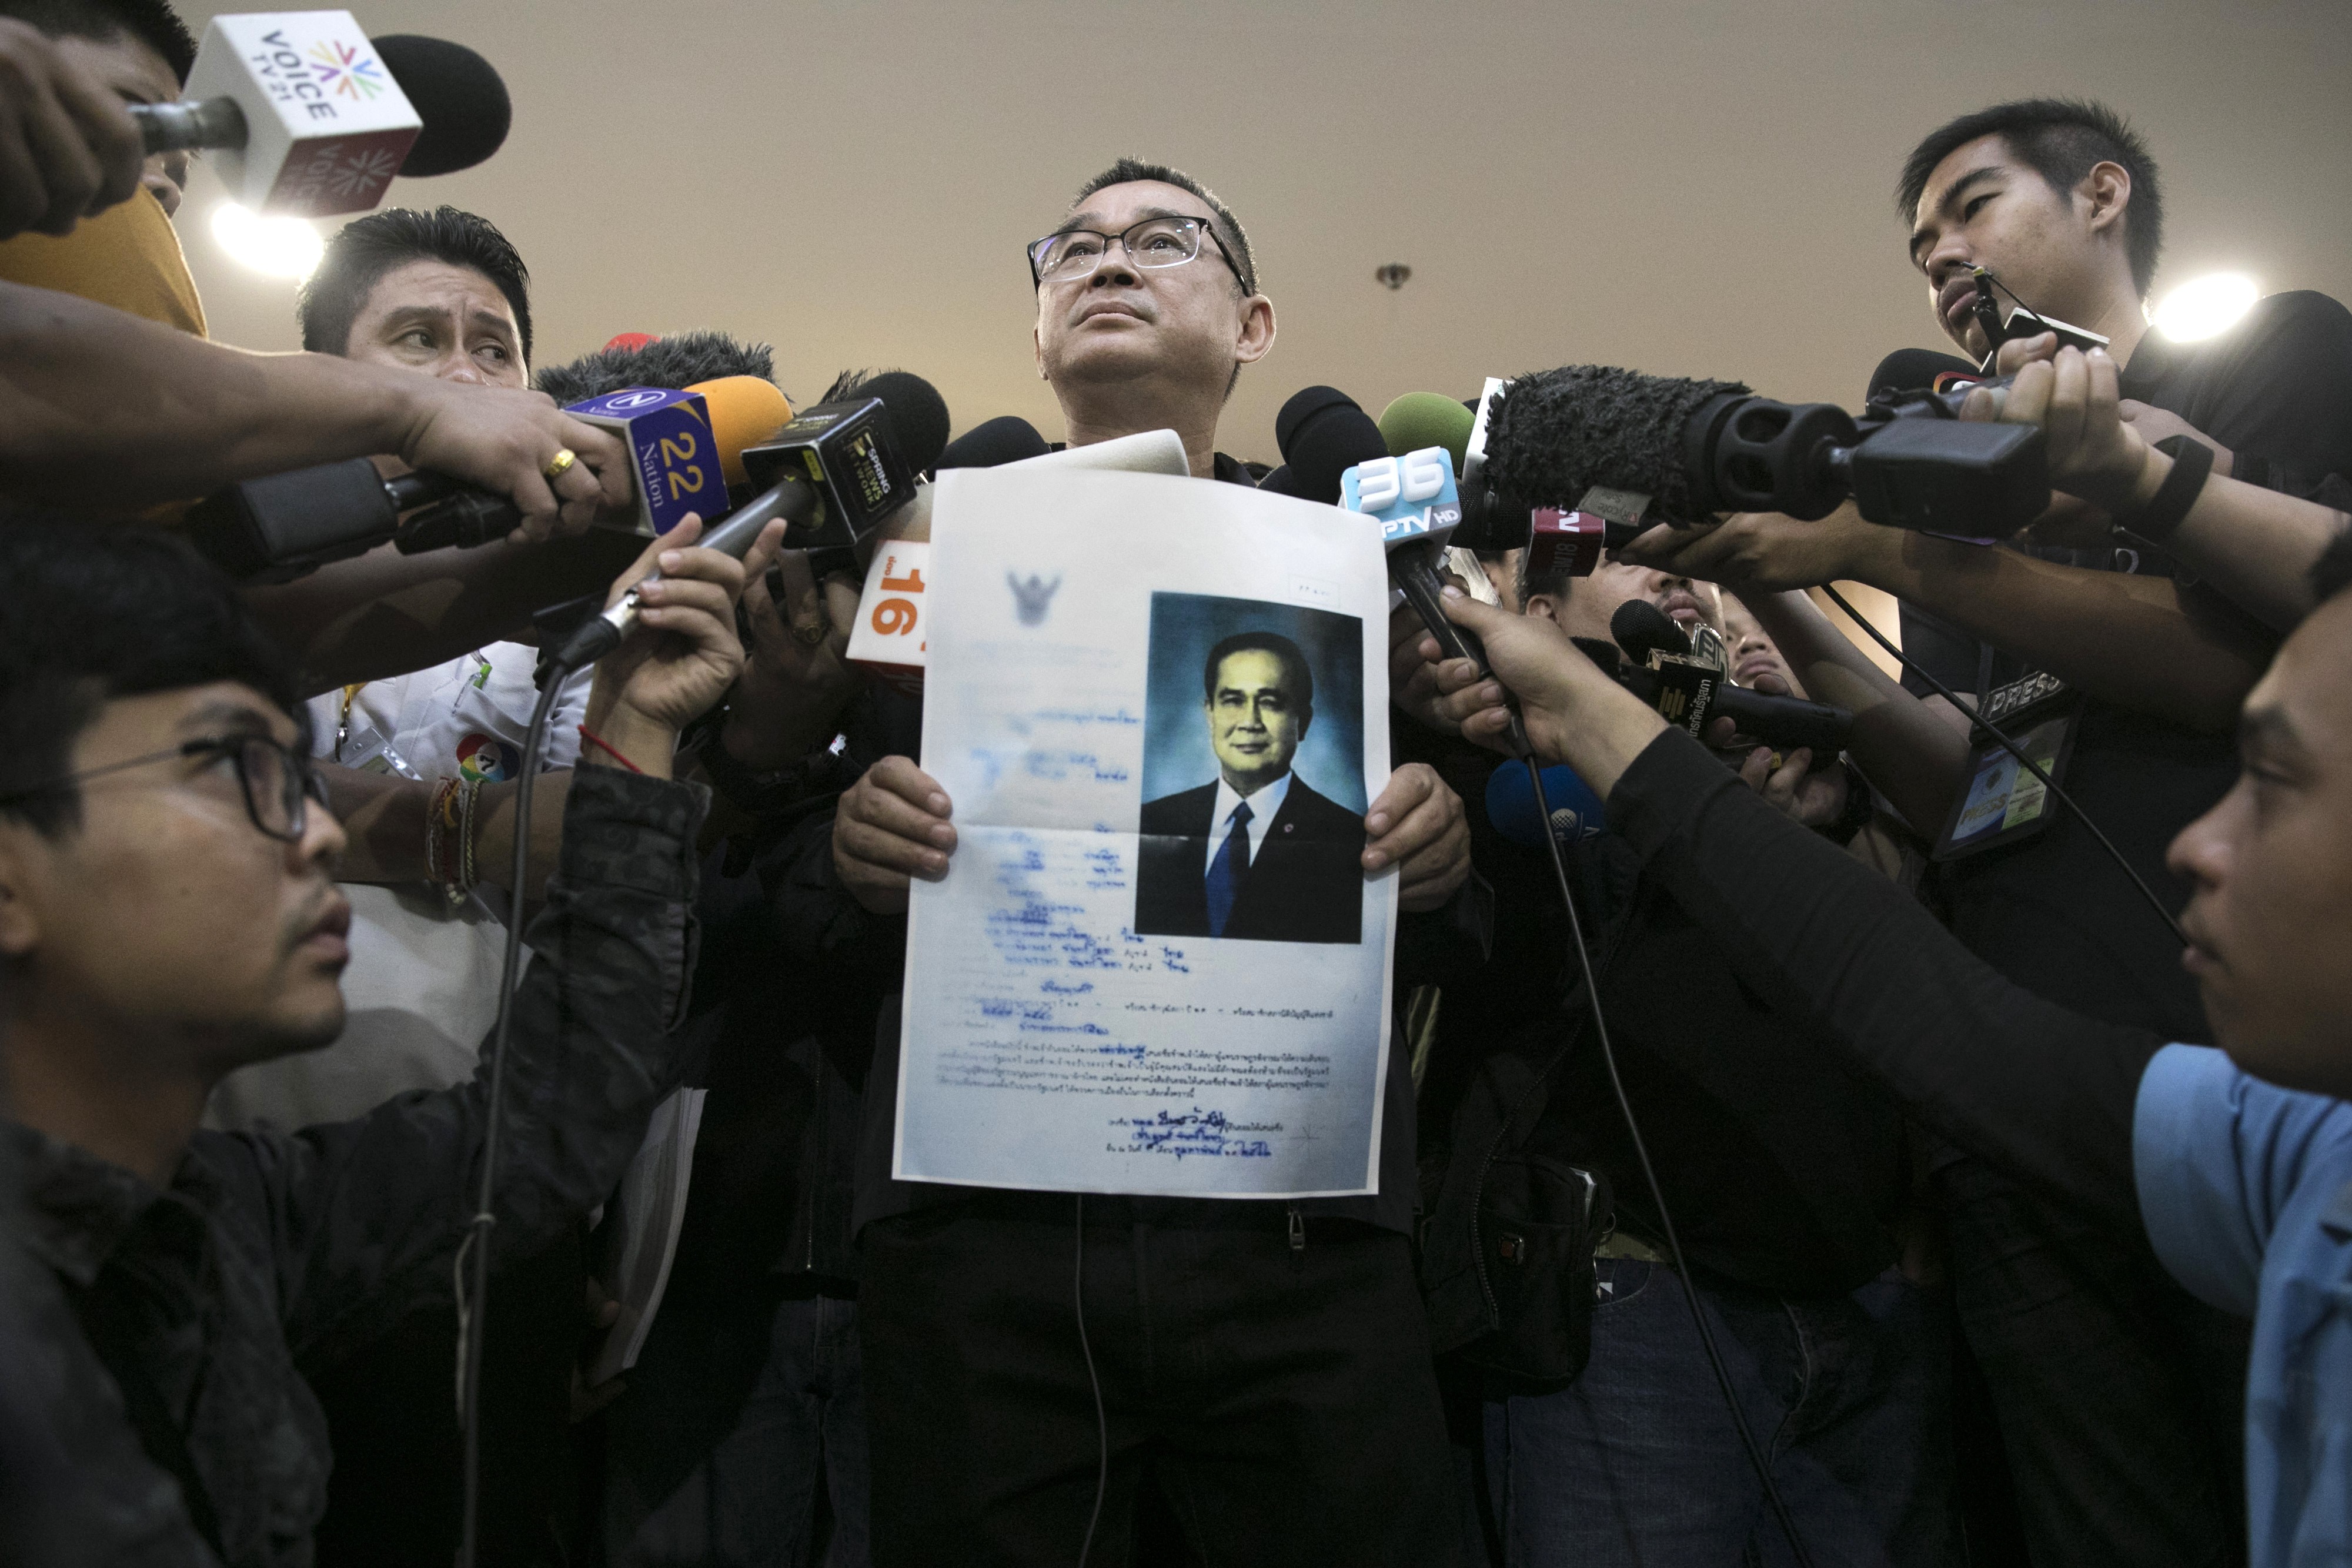 Reungkrai Leekijwatana, an official with the Thai Raksa Chart party, holds a copy of Prime Minister Prayuth Chan-Ocha's candidacy application as he speaks to members of the media at the office of the Election Commission in Bangkok, Thailand. Photo: Bloomberg